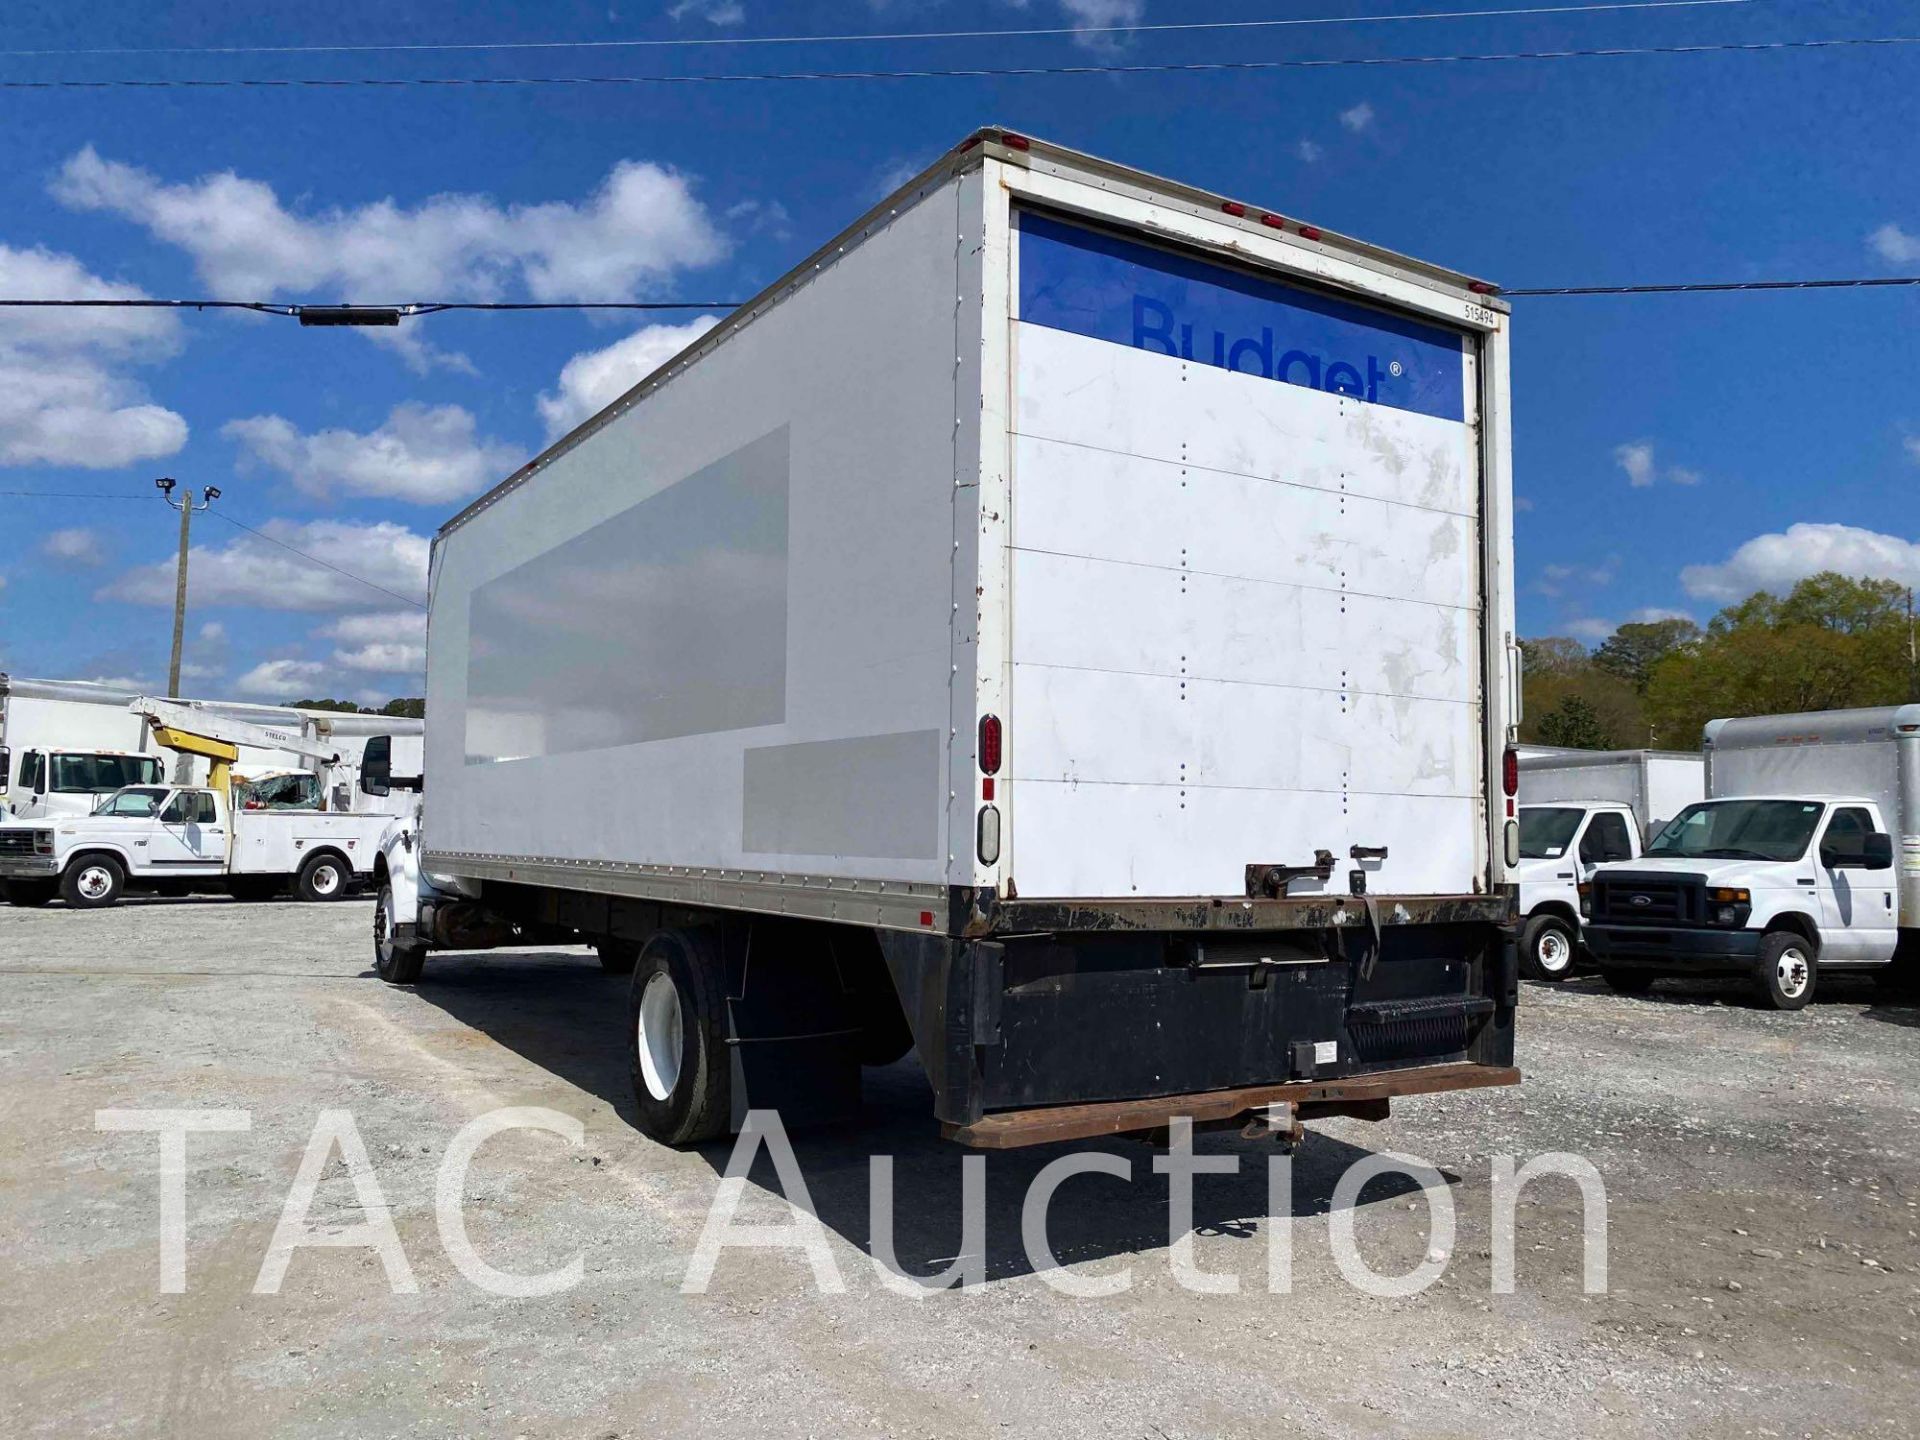 2015 Ford F-750 XL Super Duty 26ft Box Truck - Image 6 of 60